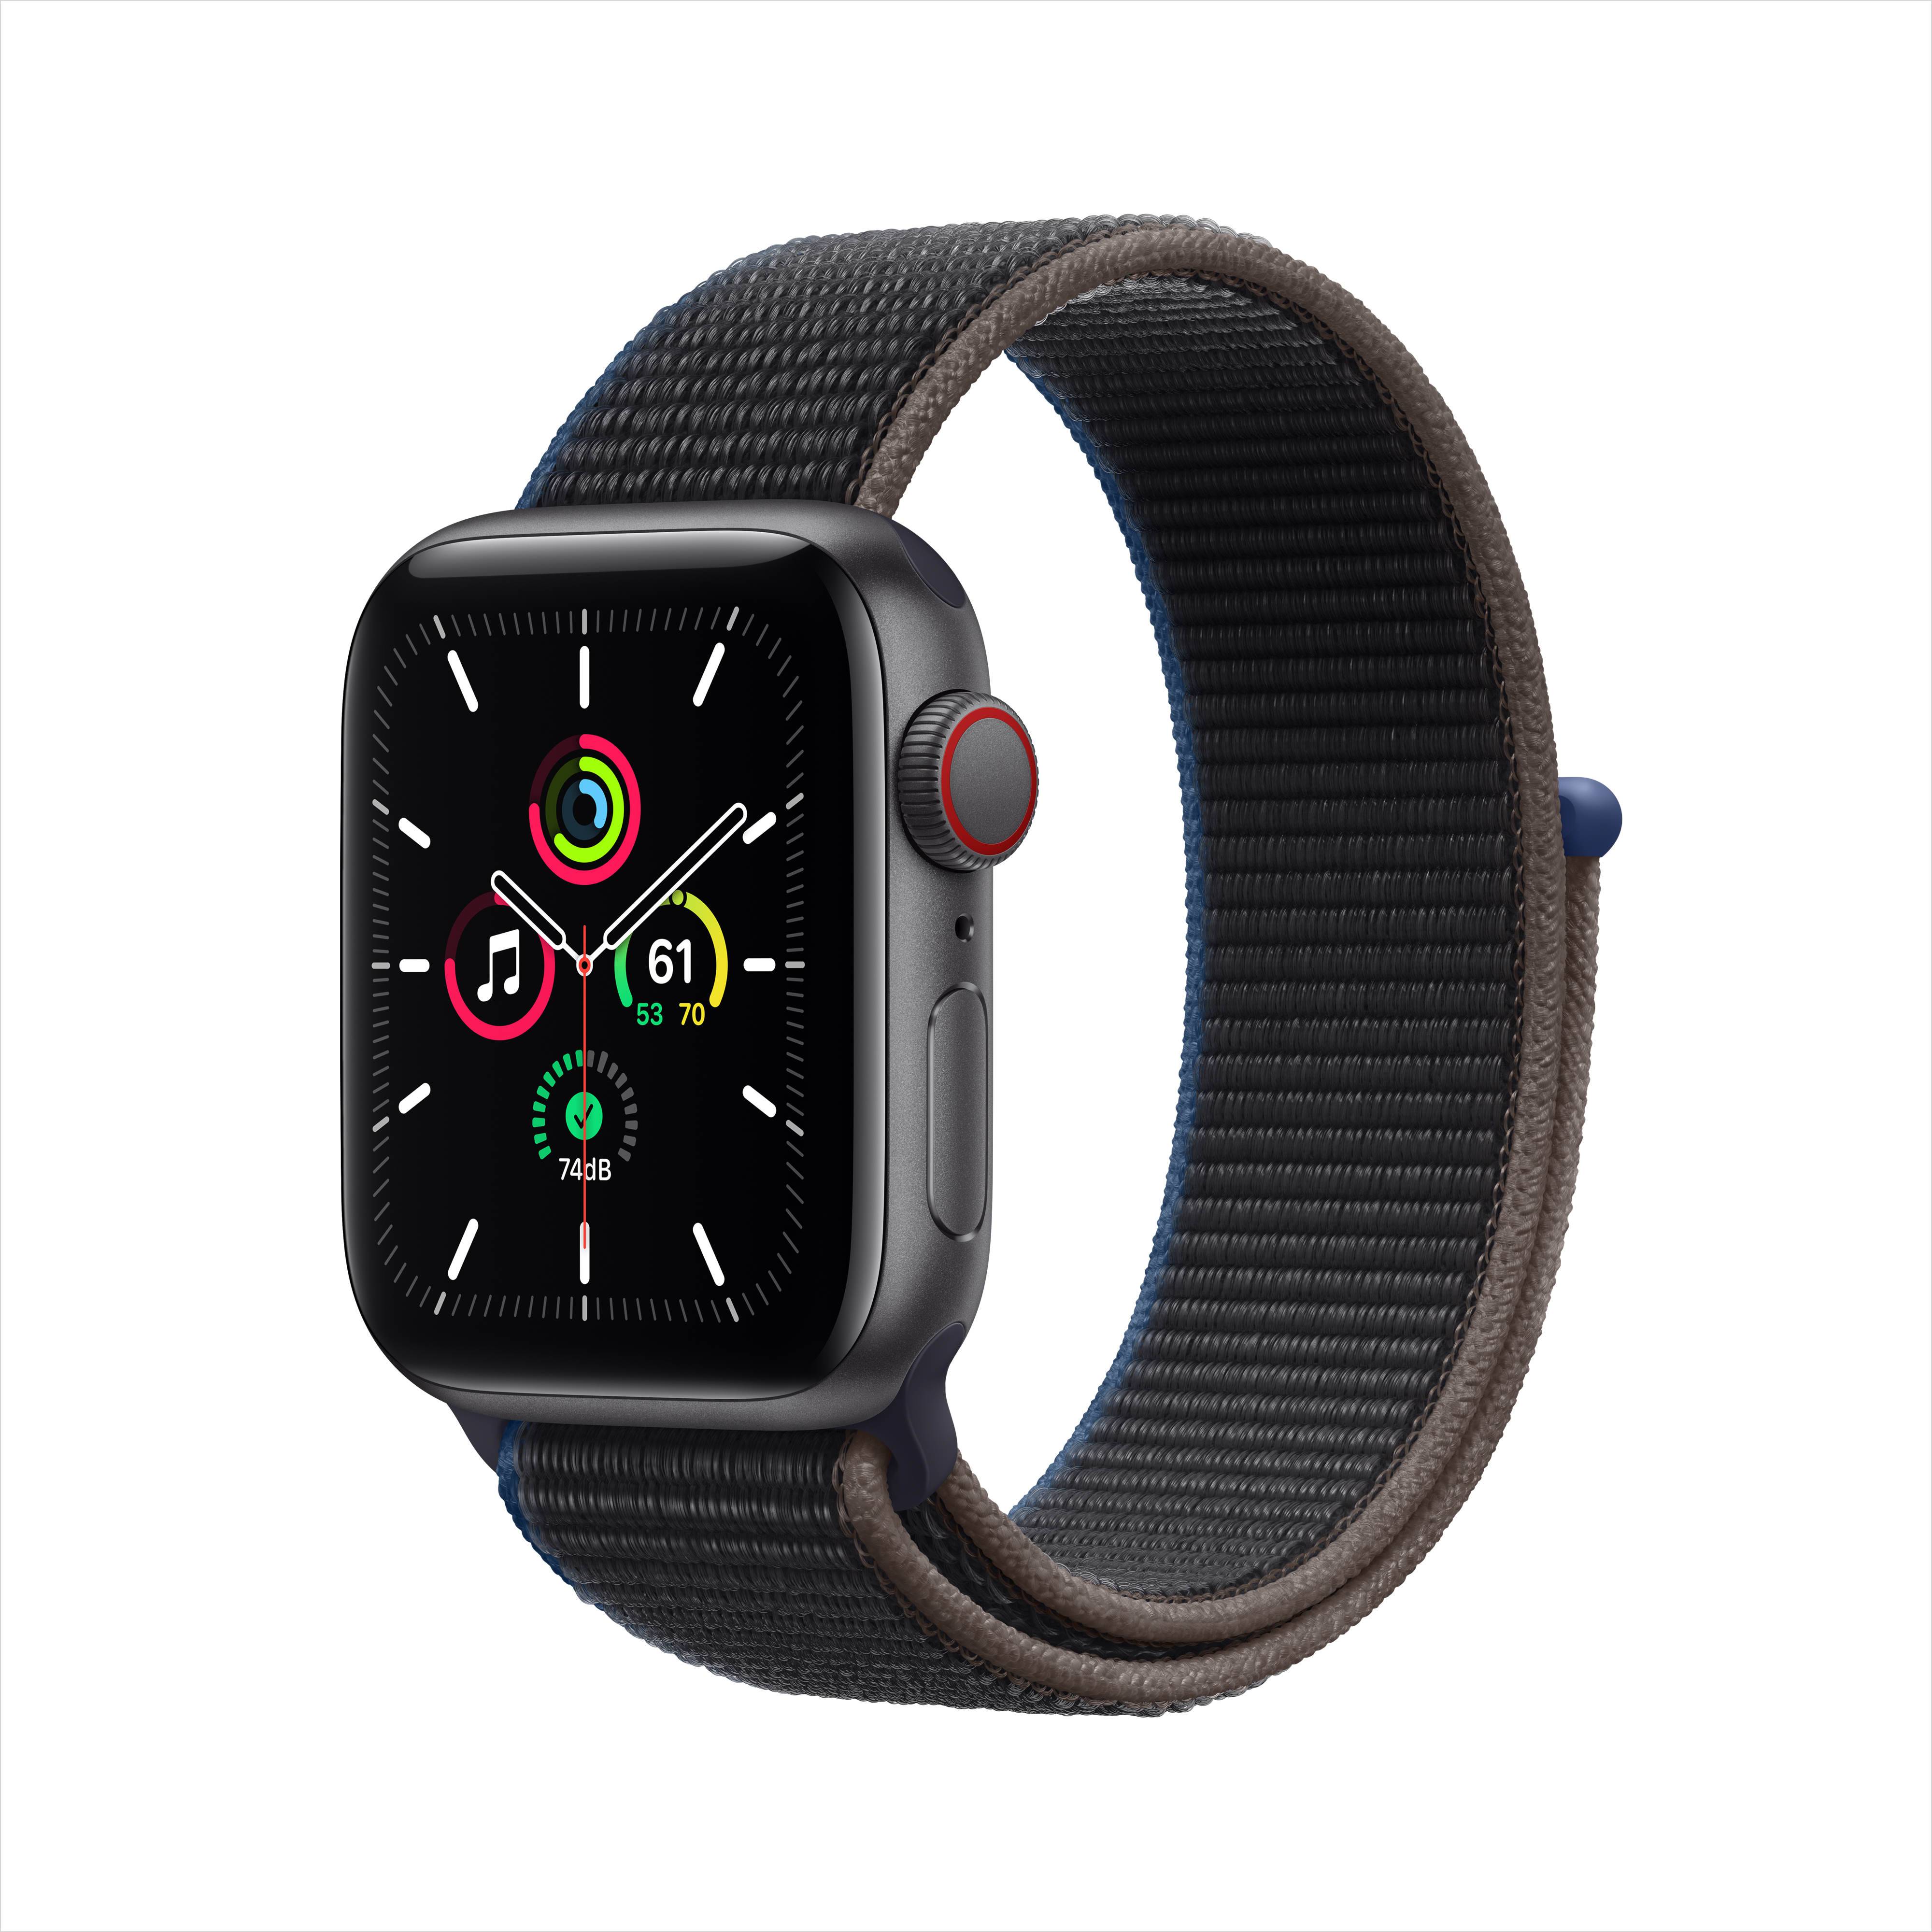 Apple Watch SE GPS + Cellular, 40mm Space Gray Aluminum Case with Charcoal  Sport Loop - Walmart.com